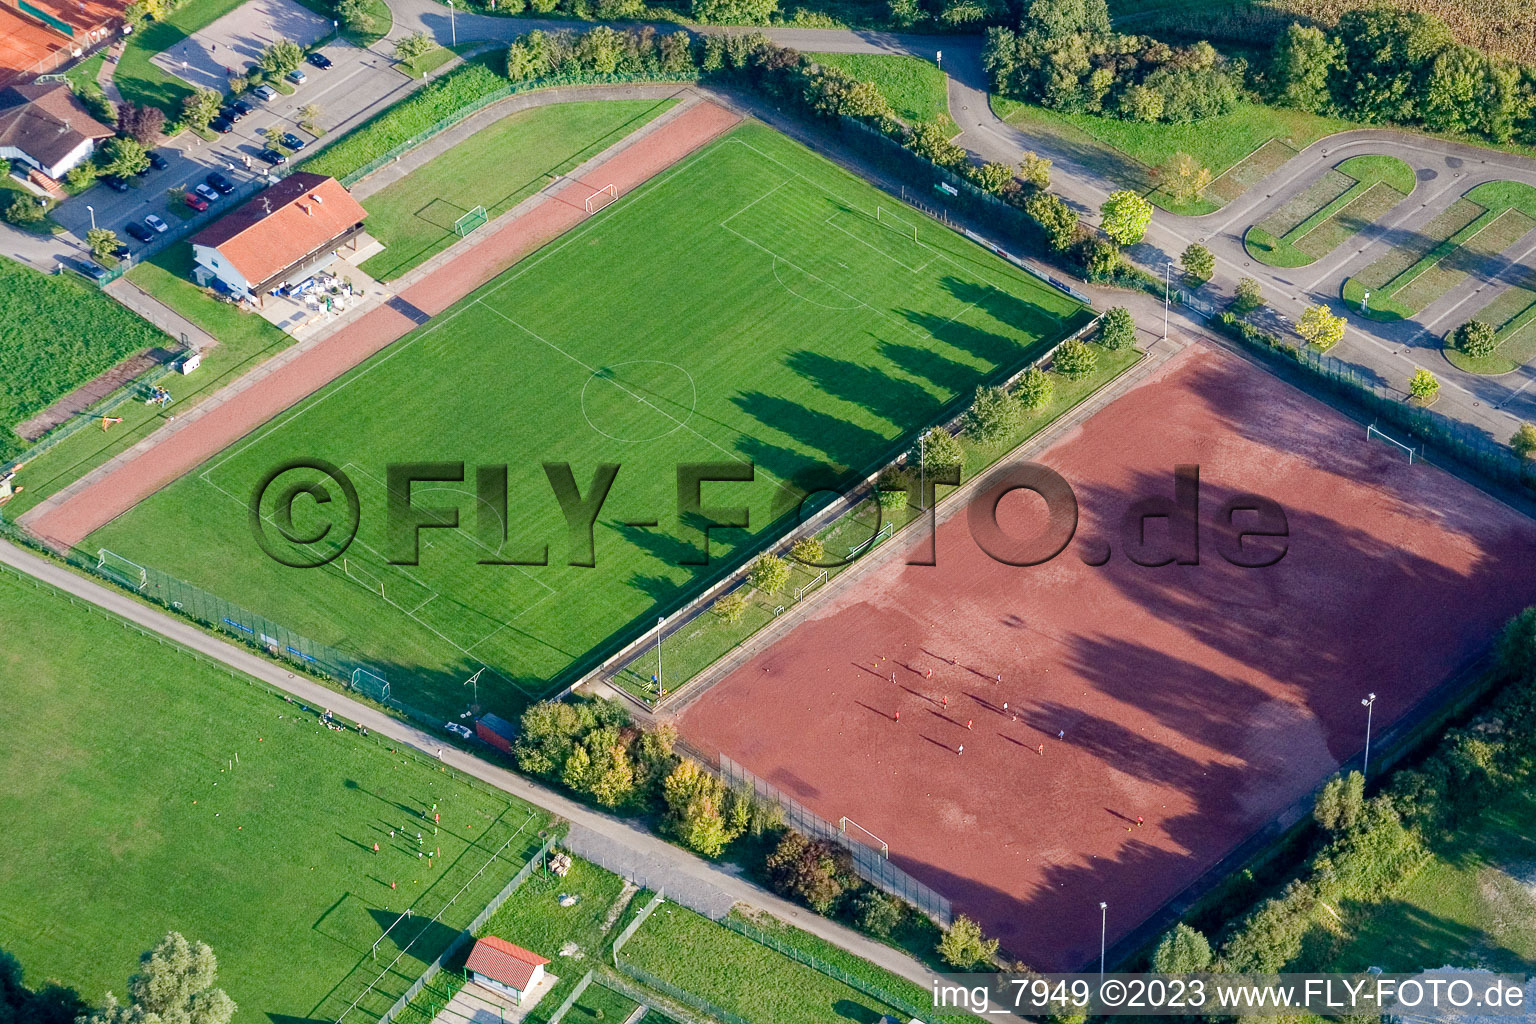 Aerial photograpy of Sports fields in Neuburg in the state Rhineland-Palatinate, Germany